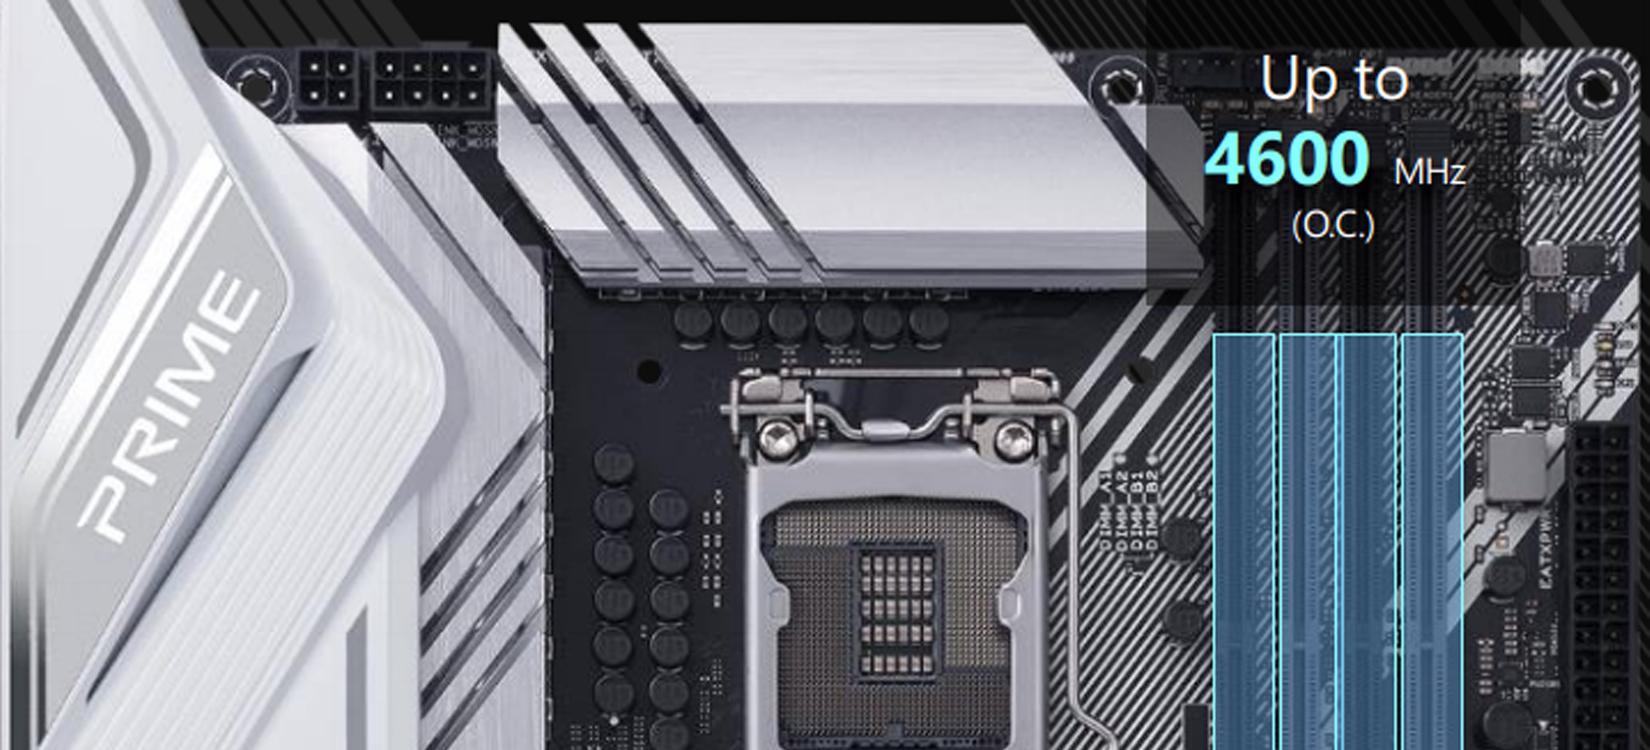 Mainboard ASUS PRIME Z490-P giá tốt